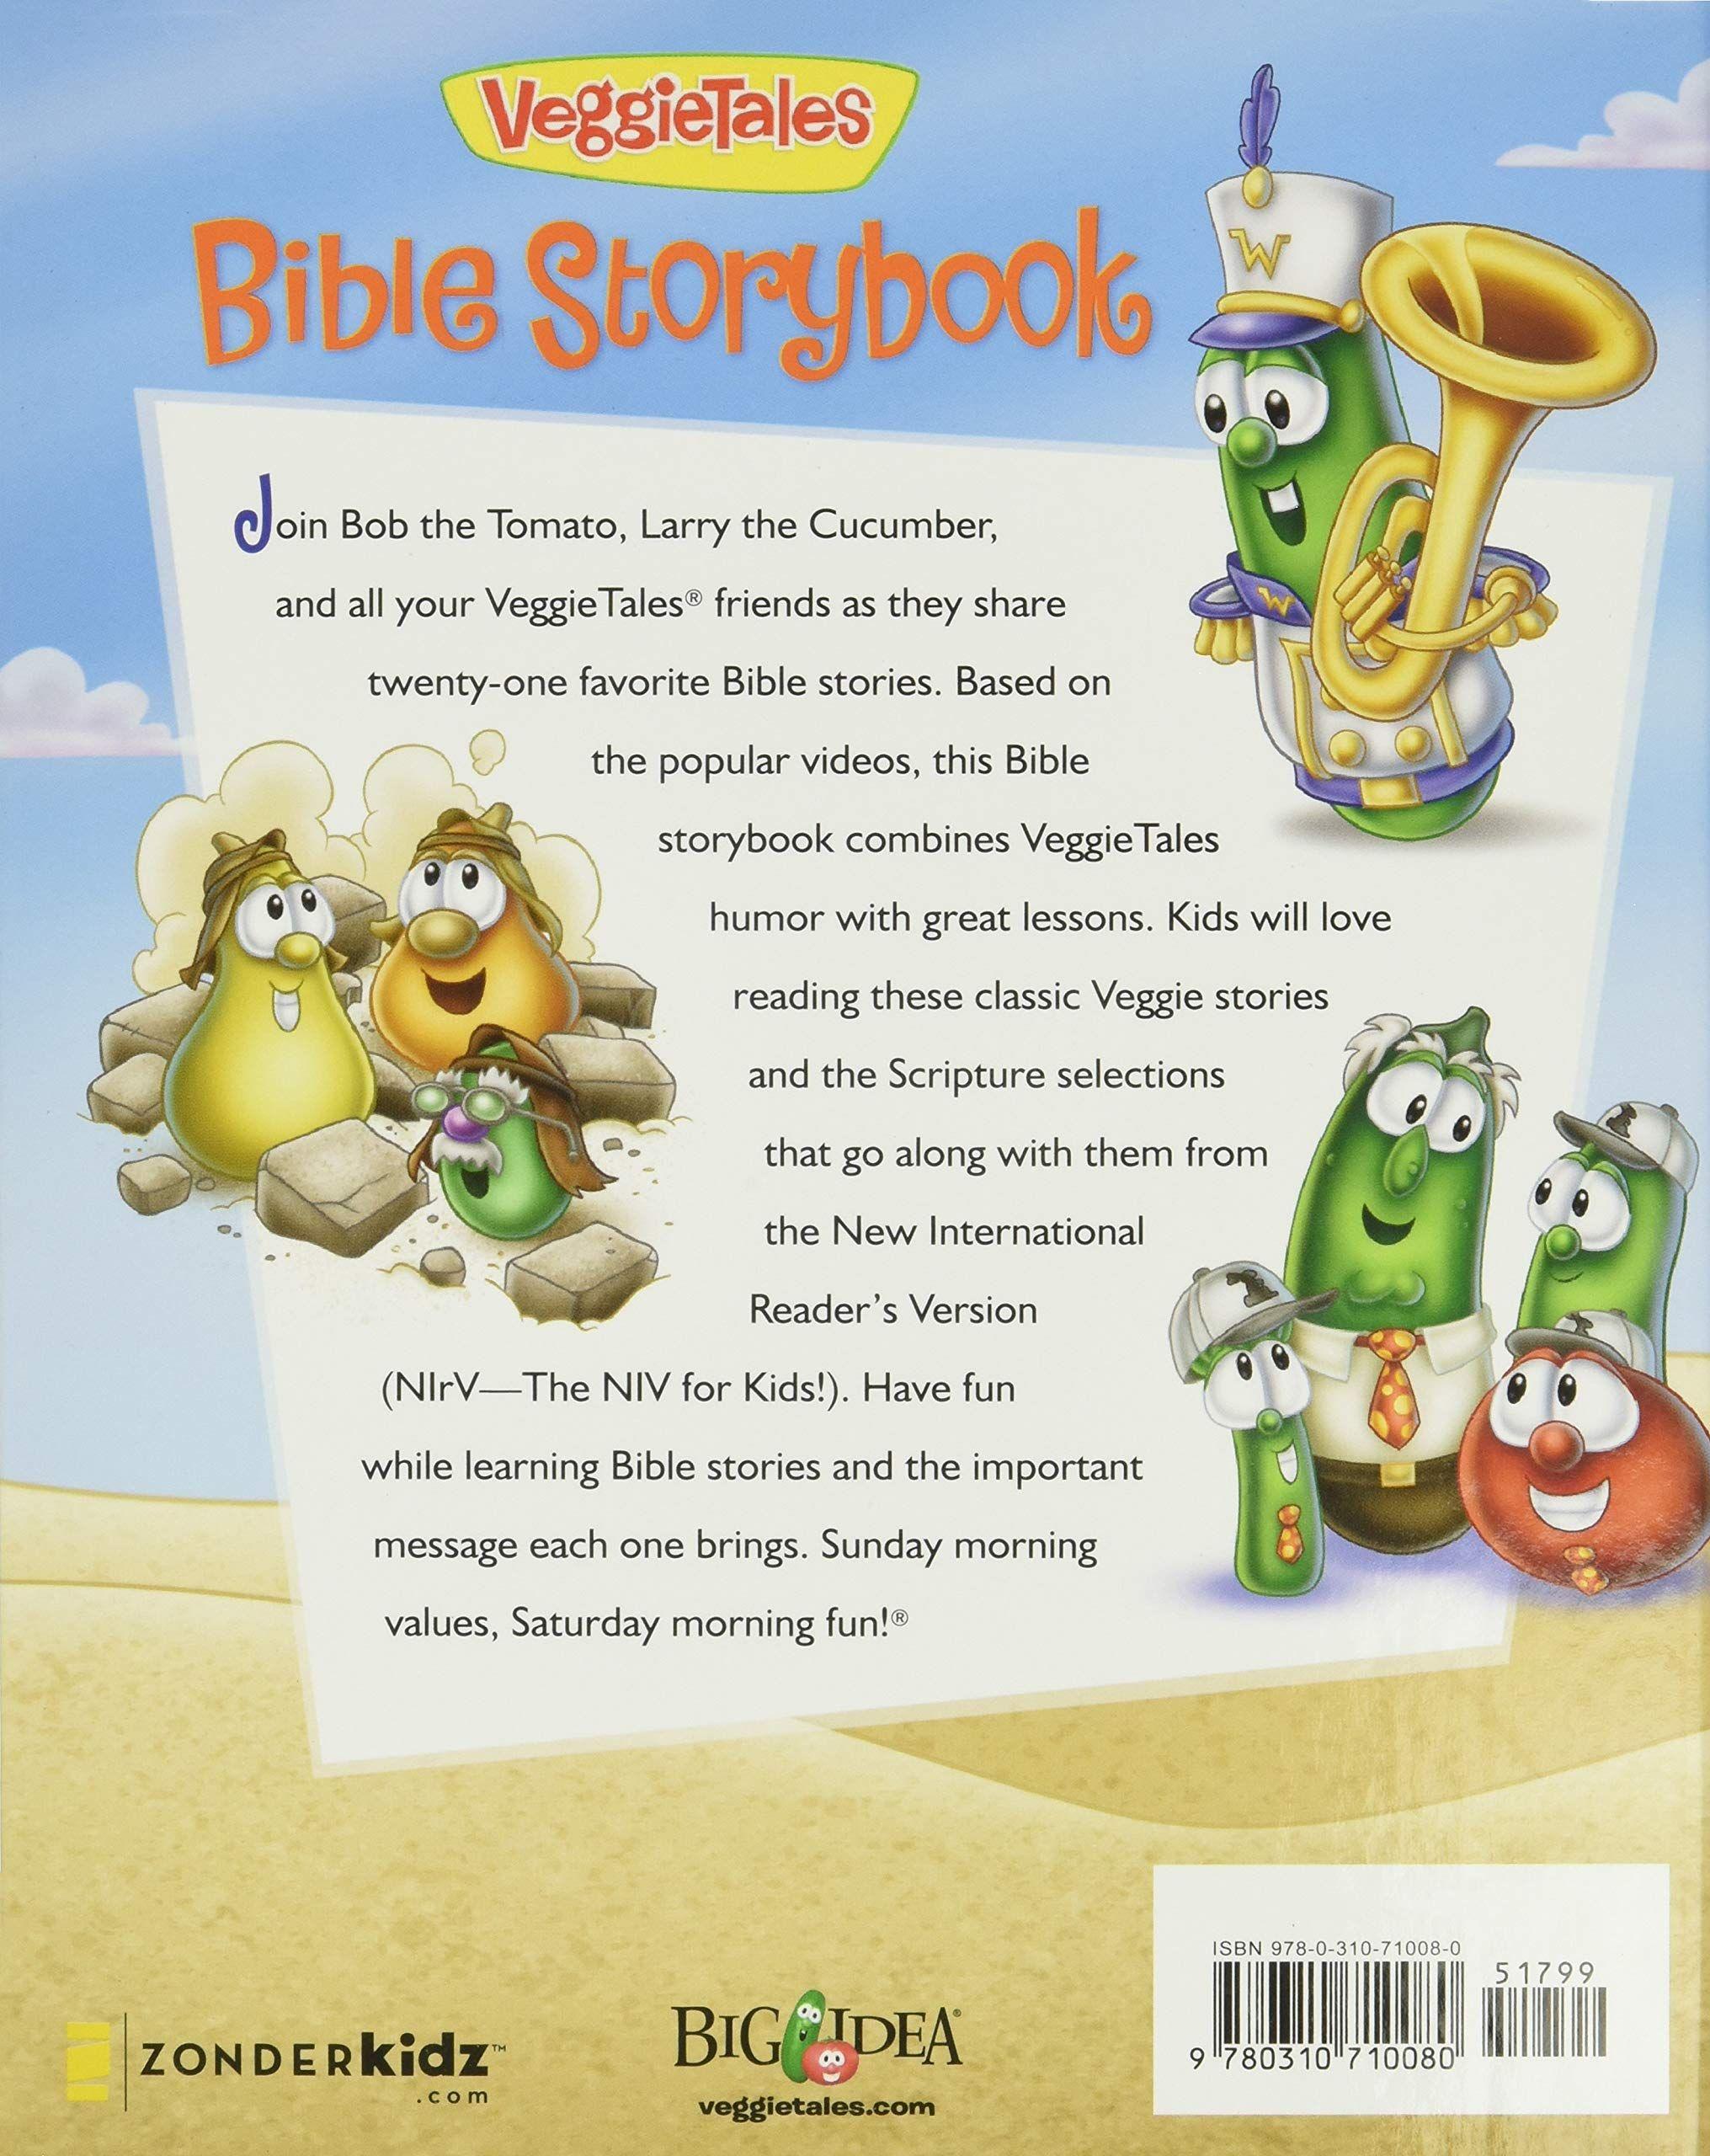 Sách - VeggieTales Bible Storybook : With Scripture from the NIrV by Cindy Kenney (US edition, hardcover)